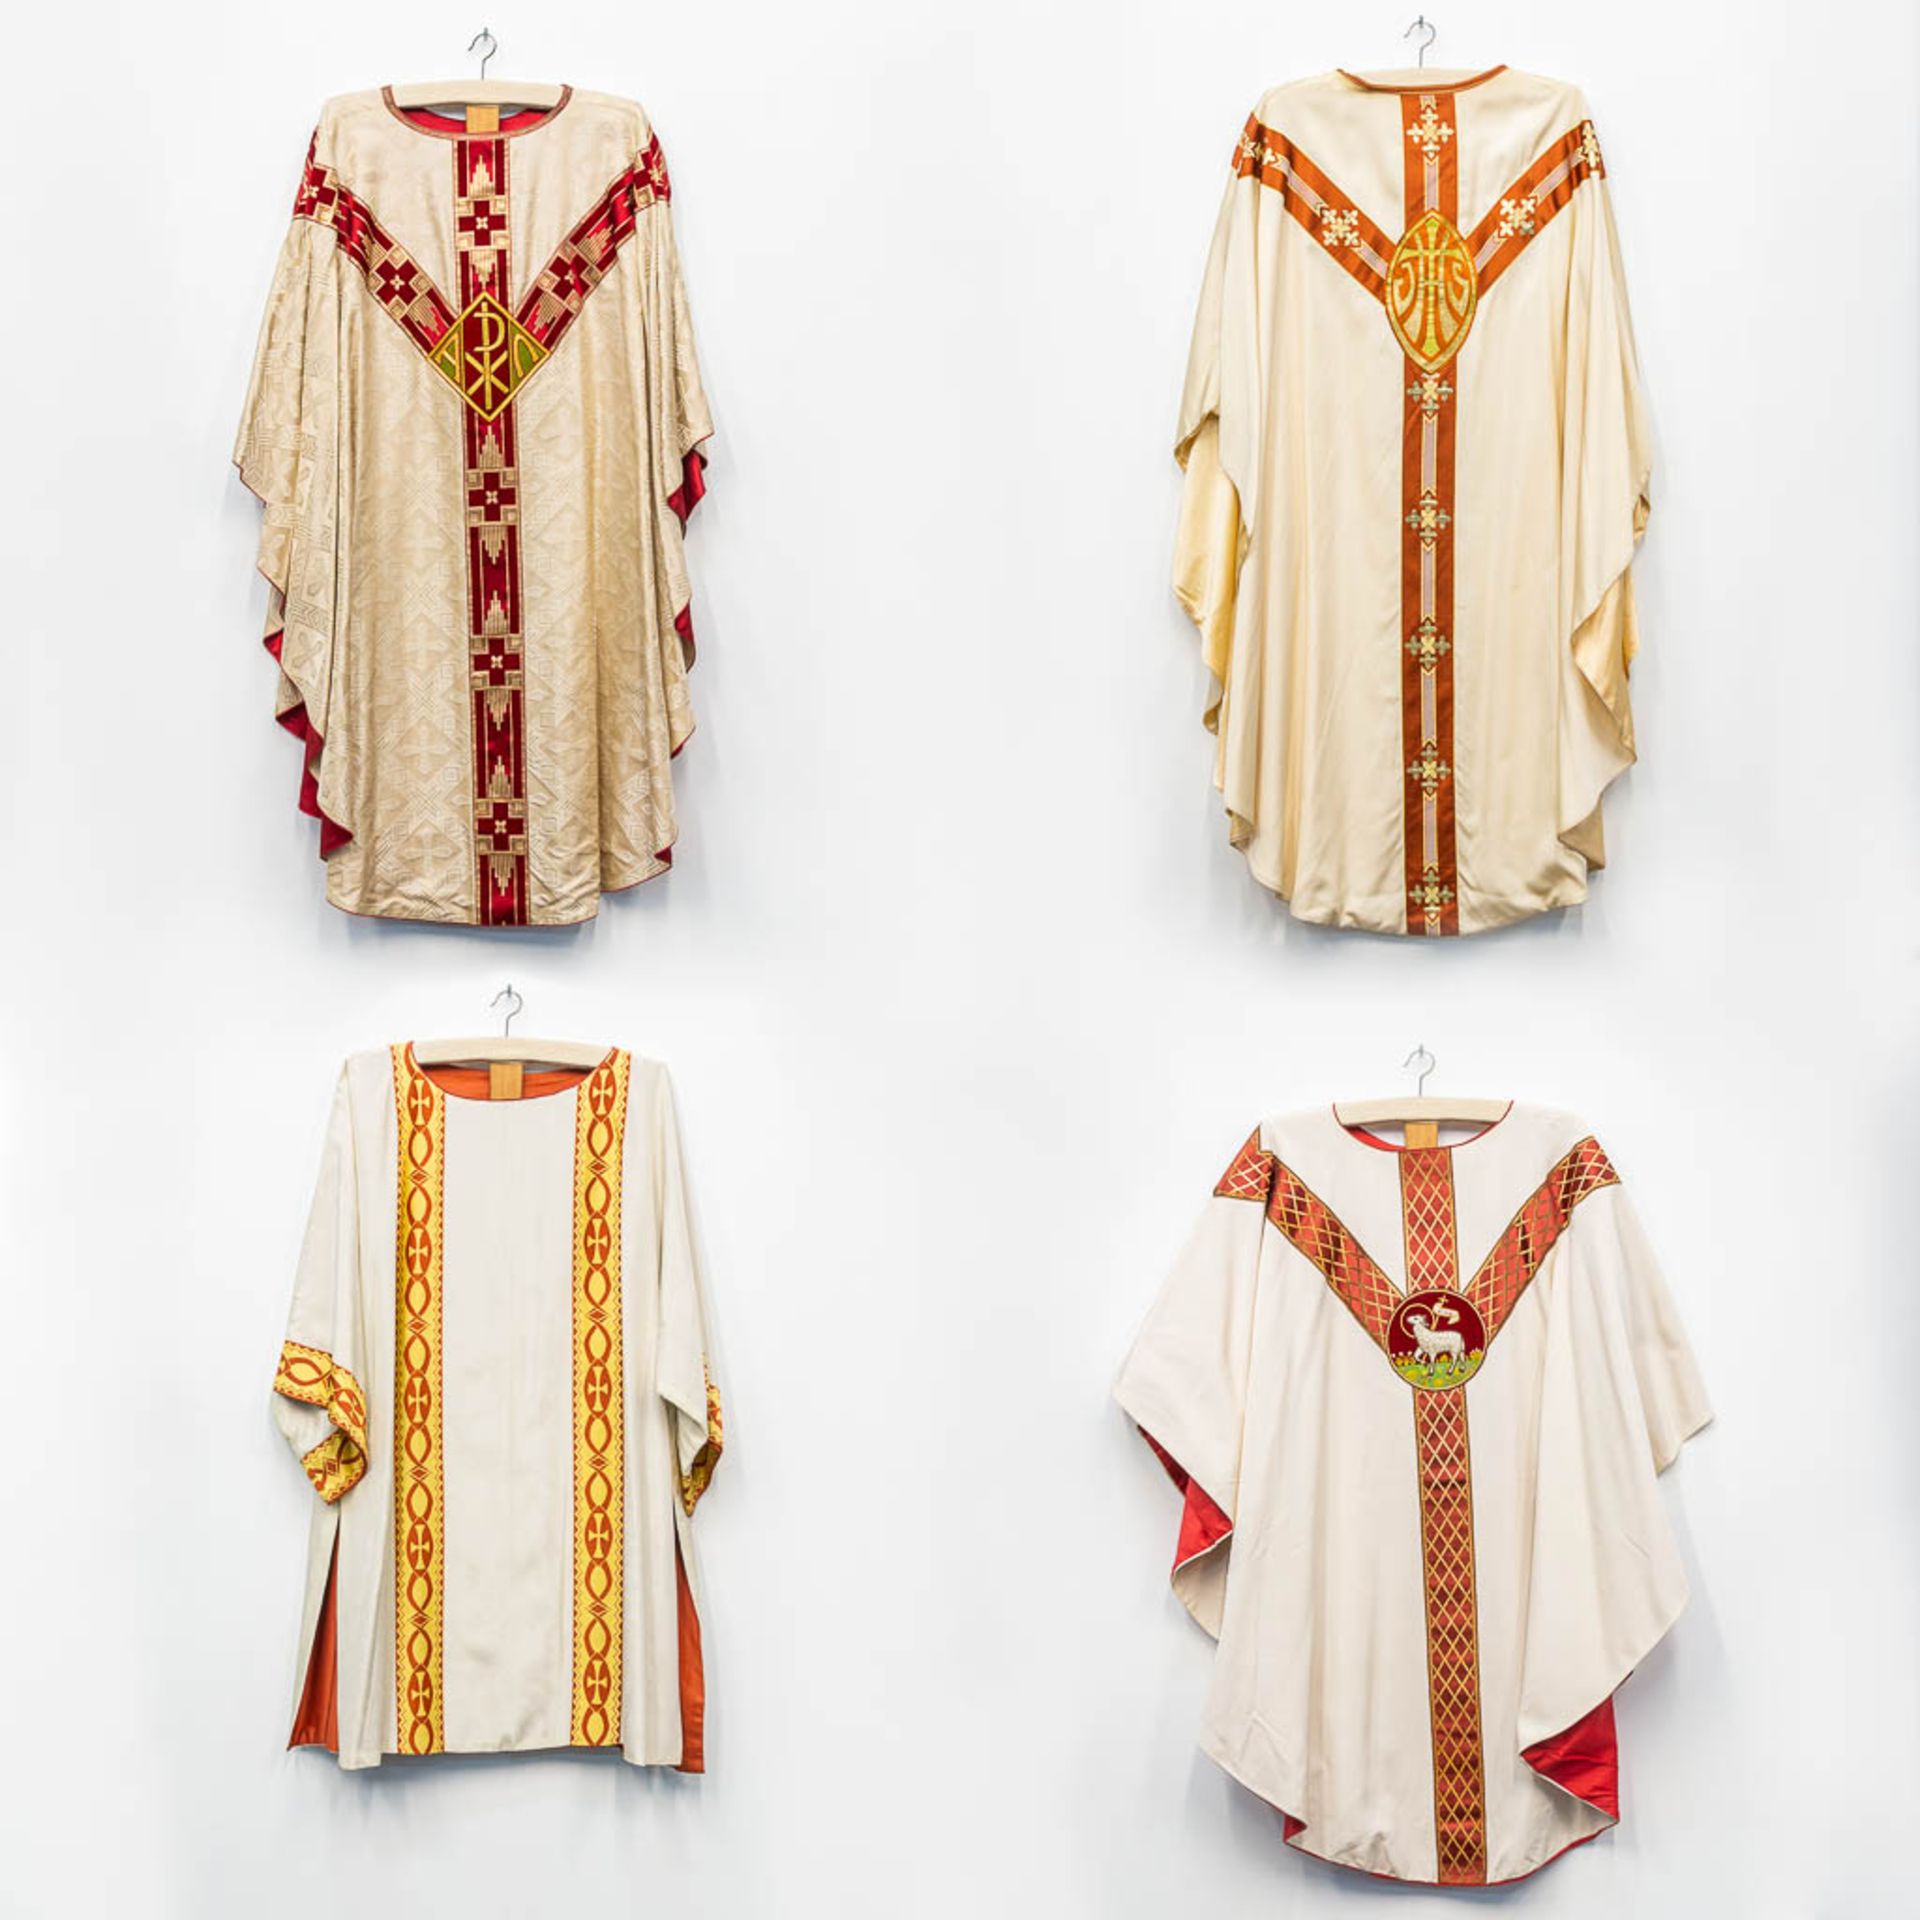 A collection of 4 vintage chasubles, 20th C. - Image 5 of 12